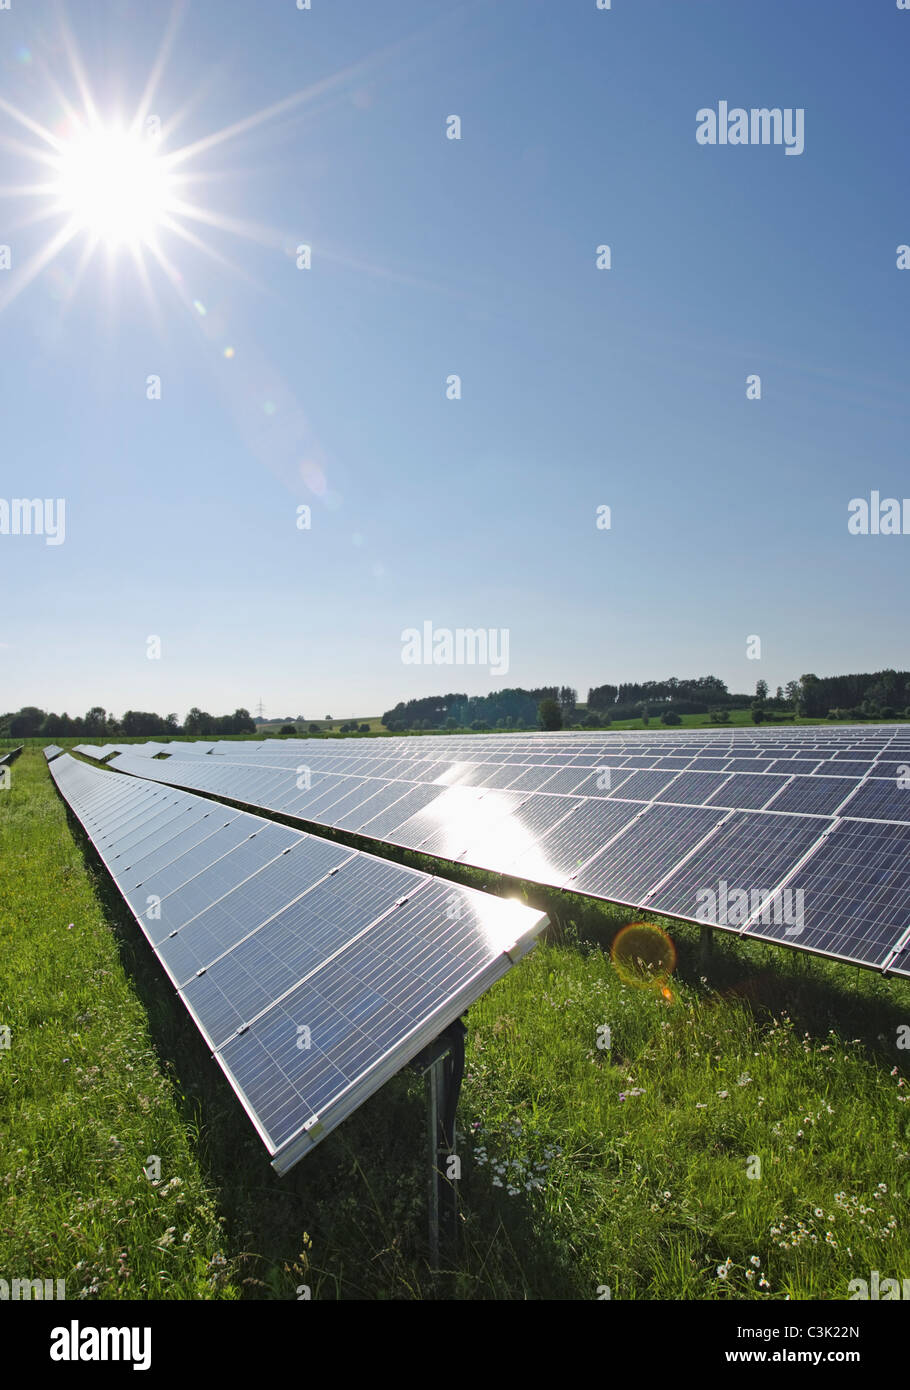 Germany, Bavaria, View of solar panels in field Stock Photo